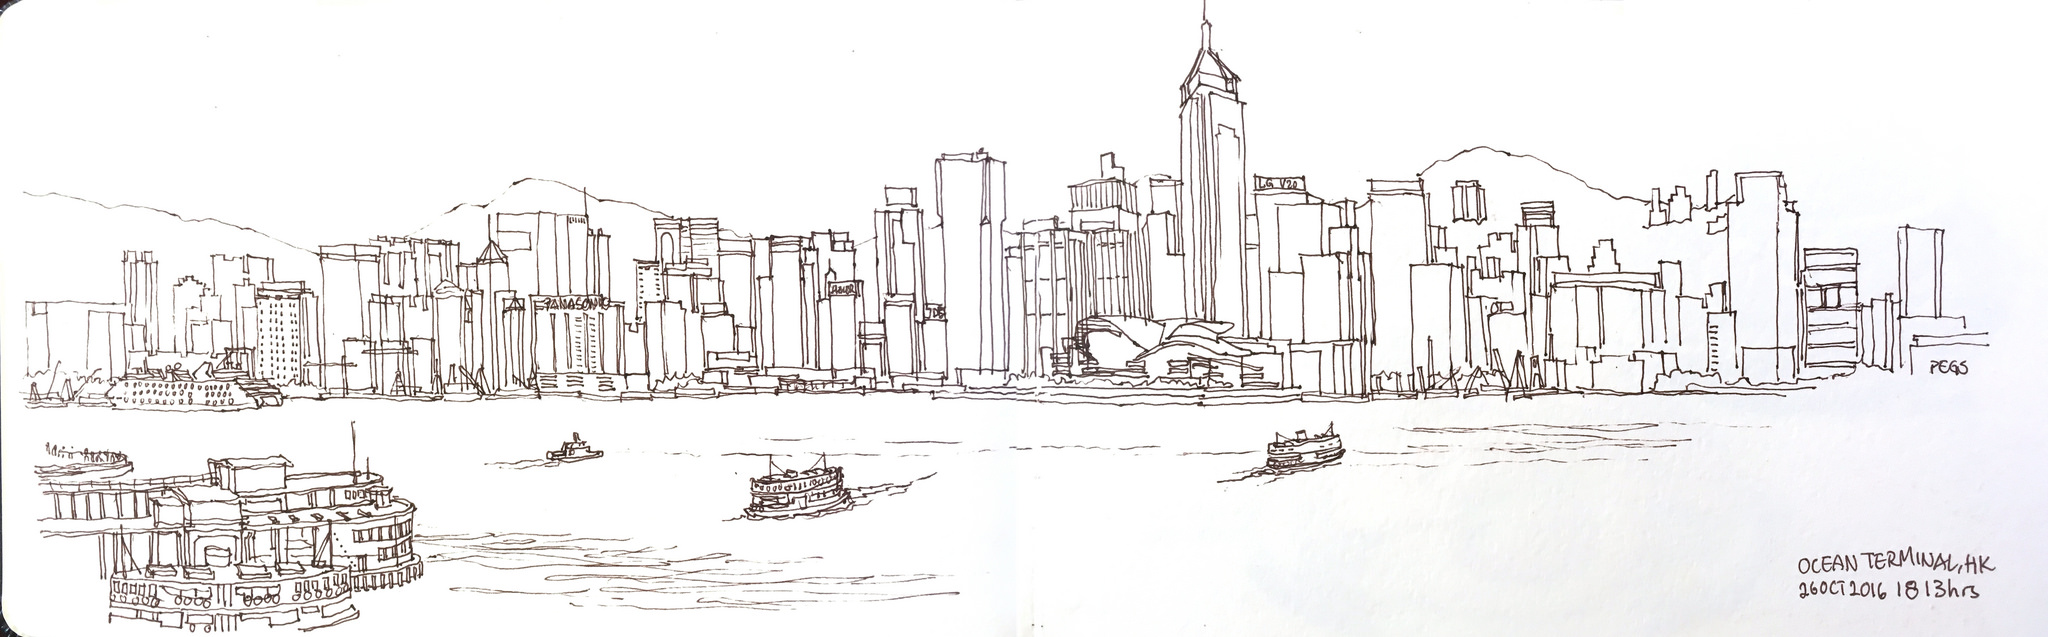 Hong Kong Skyline Sketch at Explore collection of